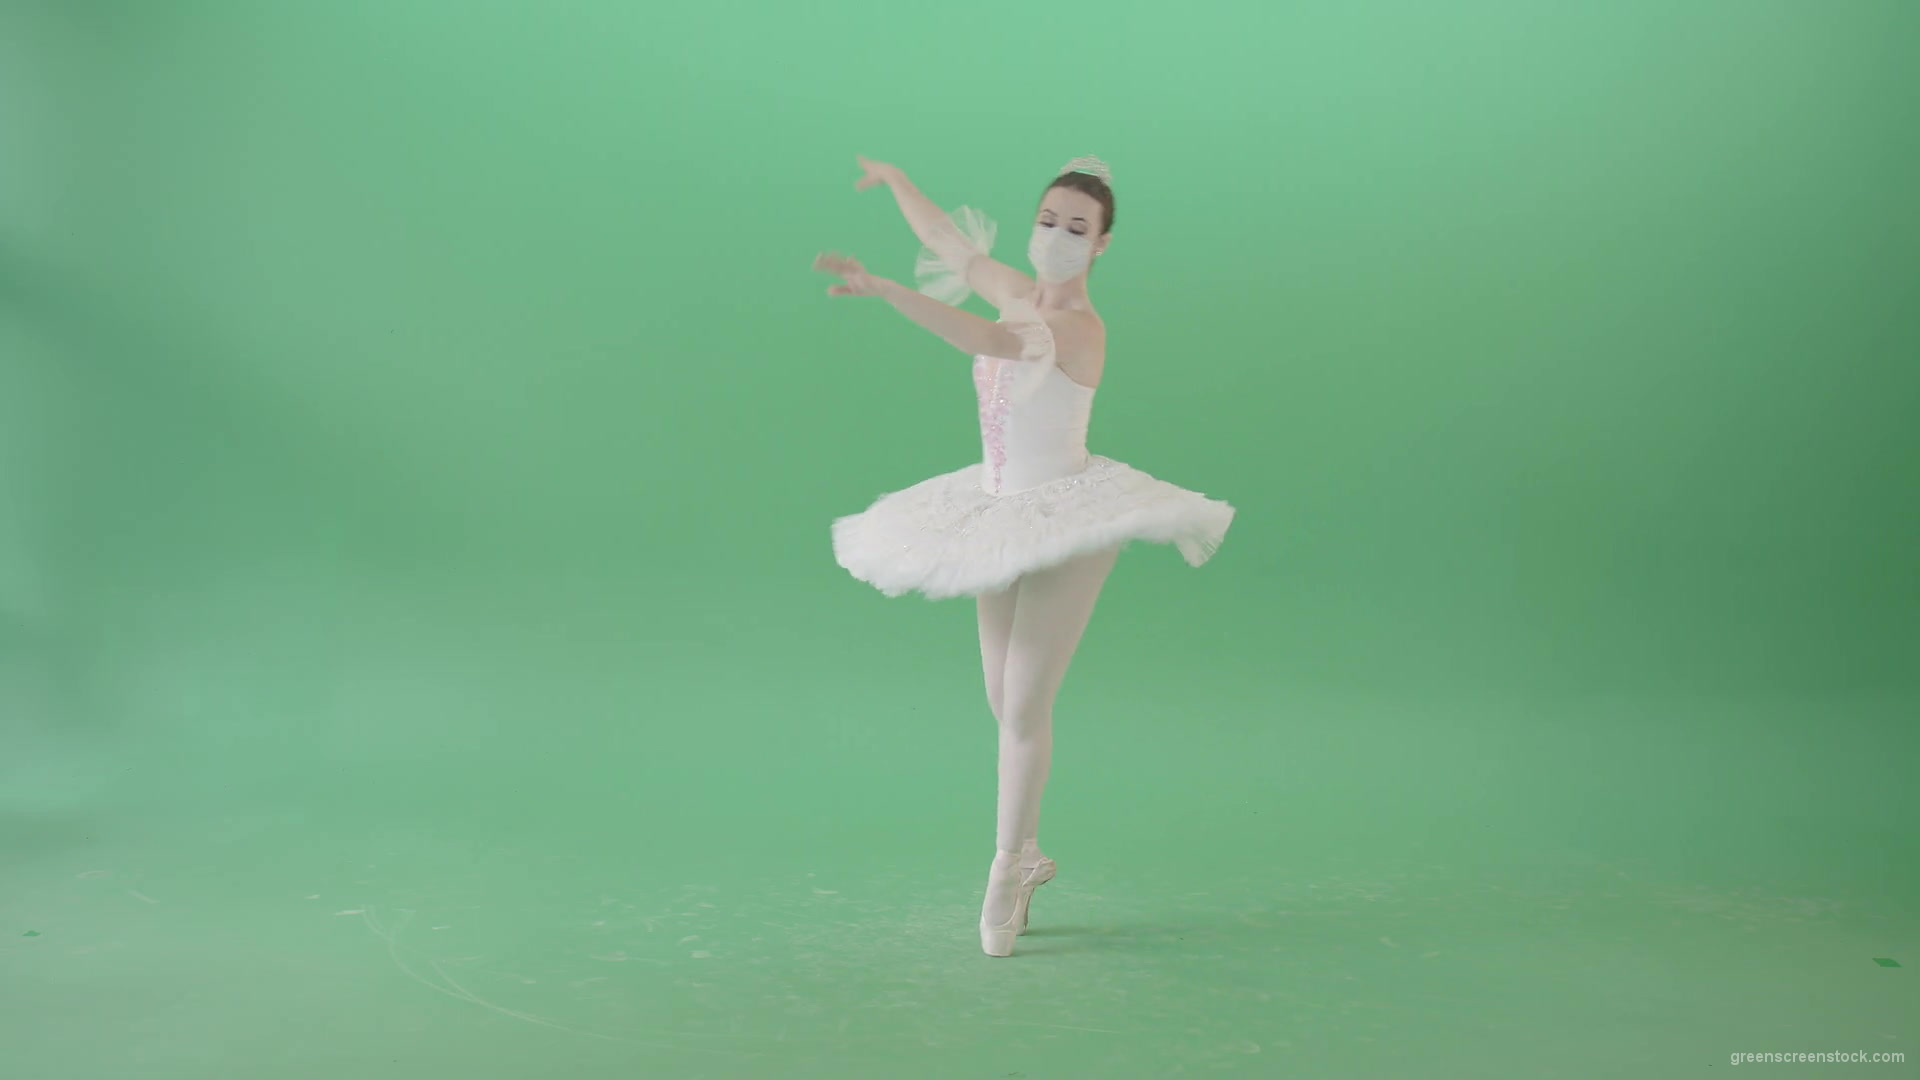 Dancing-ballerina-Girl-in-Ballet-Dress-and-Covid19-mask-dancing-isolated-on-green-screen-4K-Video-Footage--1920_004 Green Screen Stock